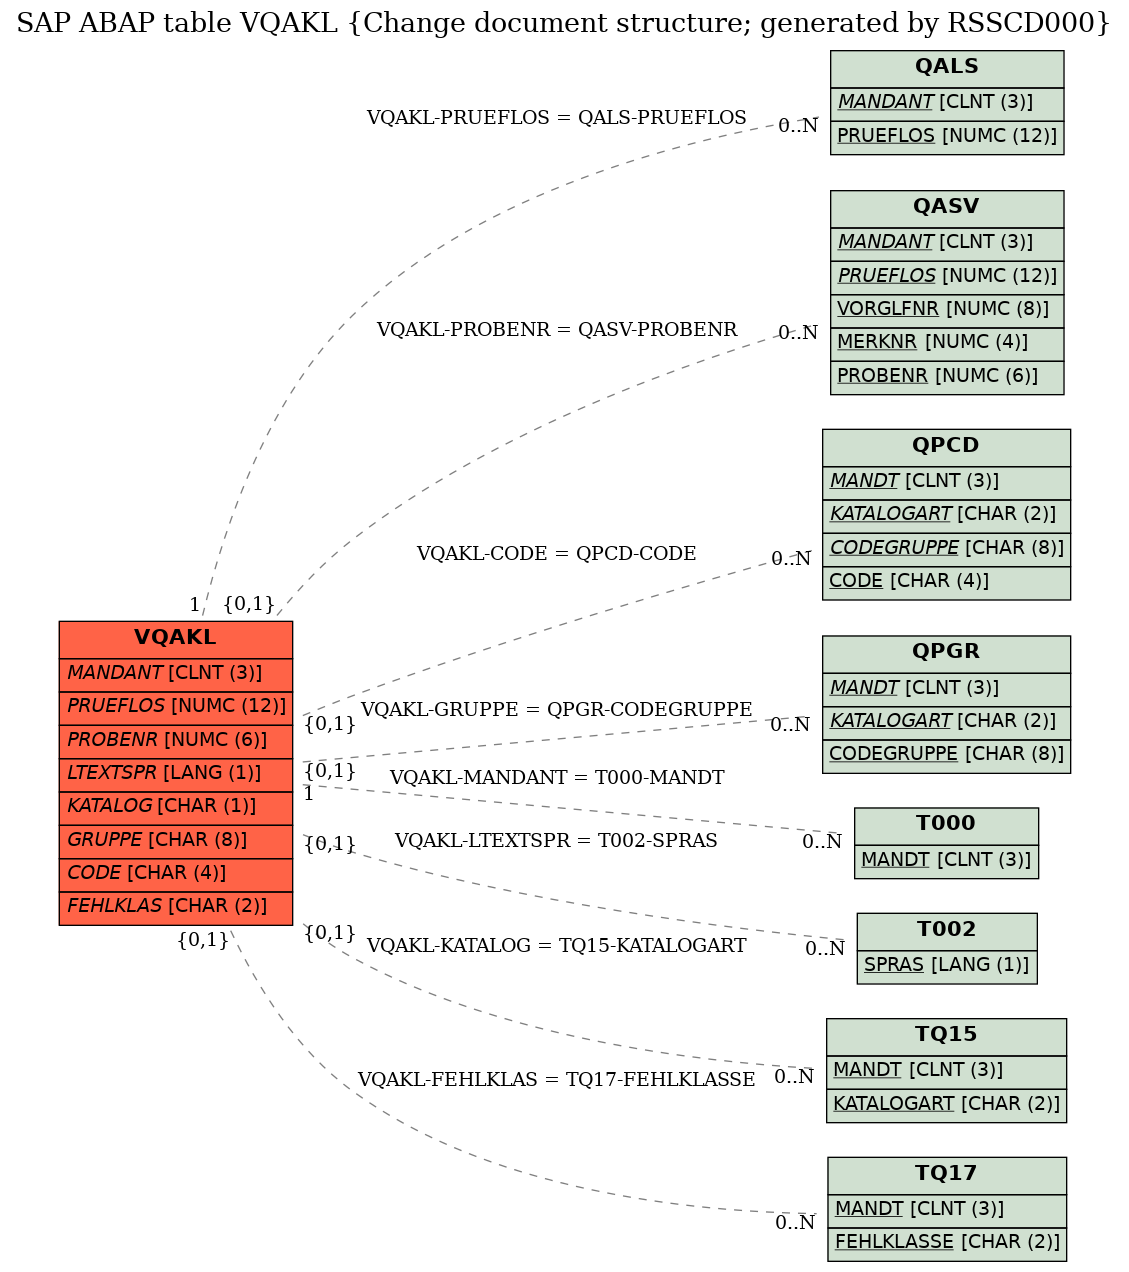 E-R Diagram for table VQAKL (Change document structure; generated by RSSCD000)